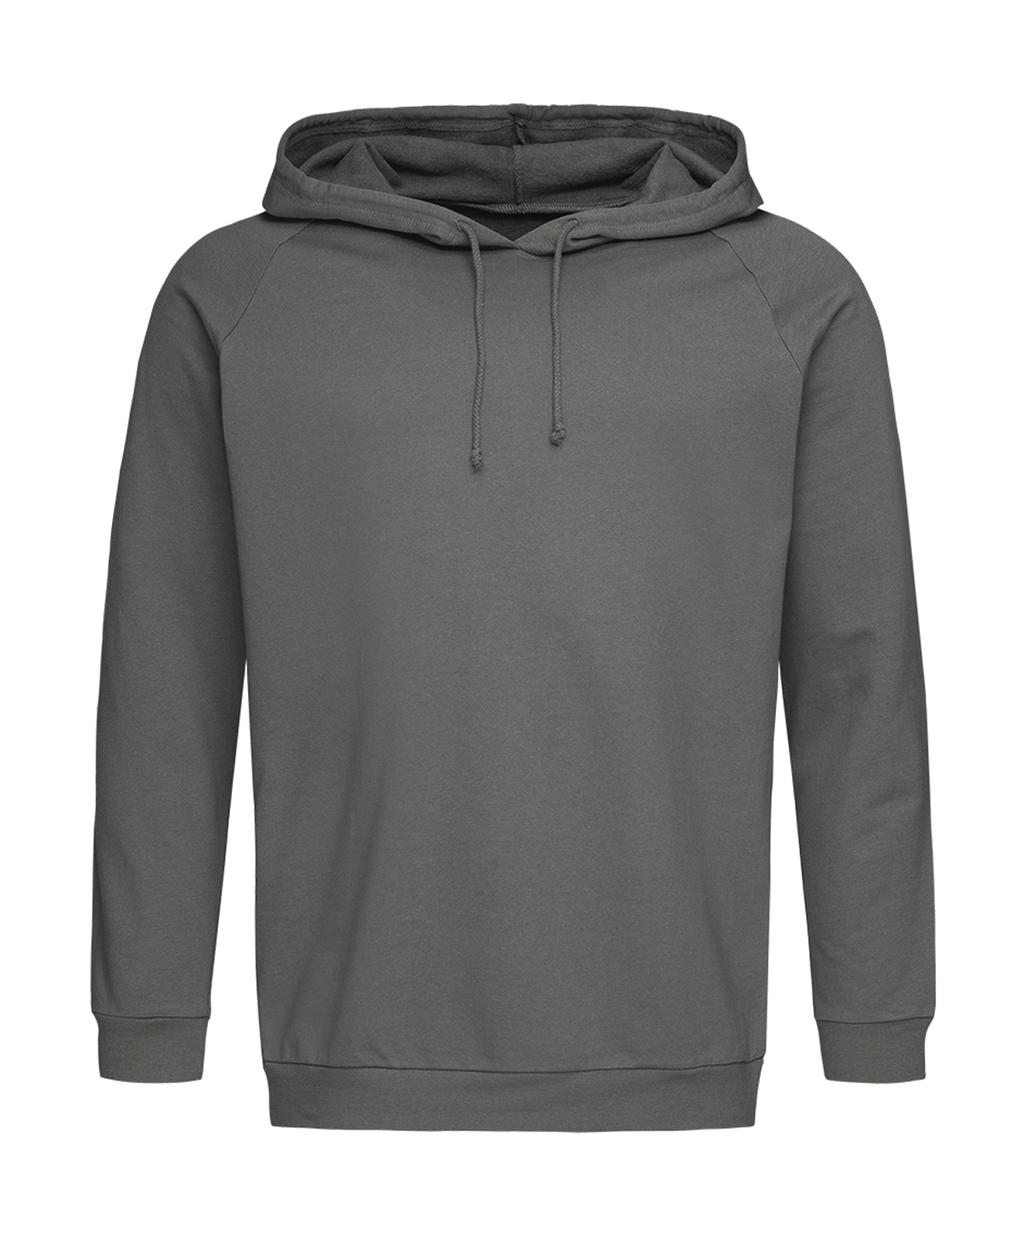  Unisex Sweat Hoodie Light in Farbe Real Grey